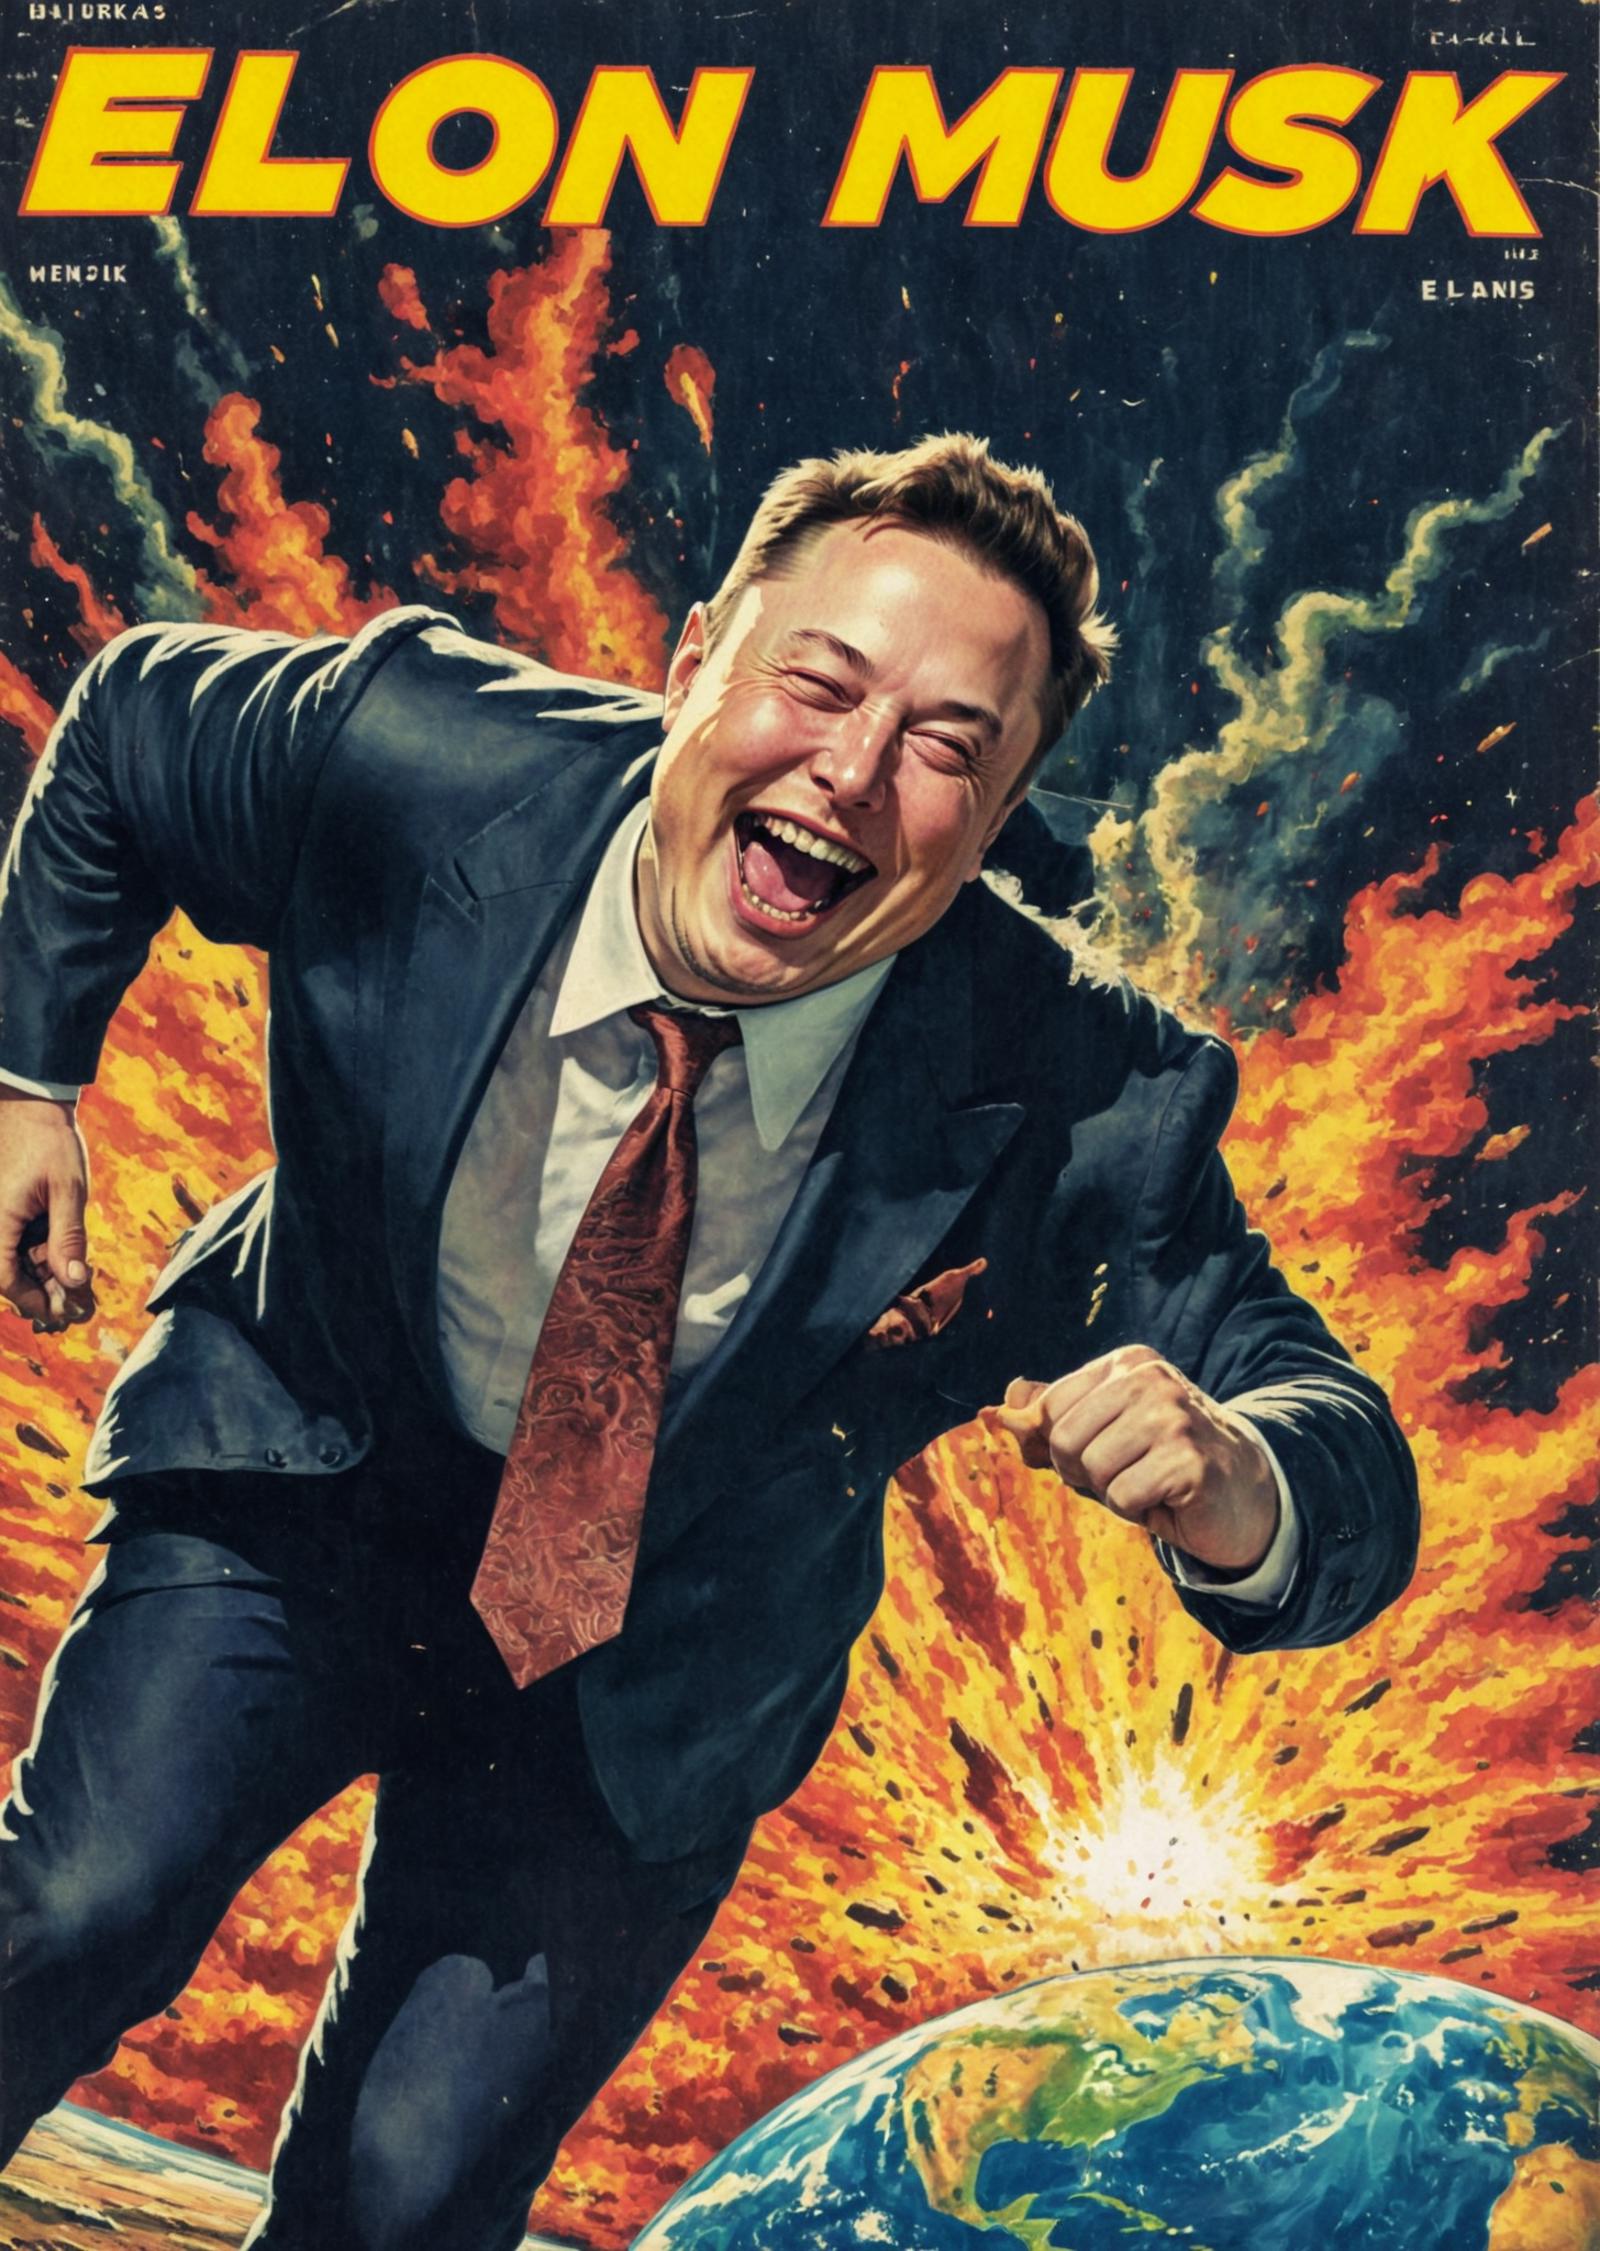 A man in a suit and tie laughing and running through a fiery explosion.